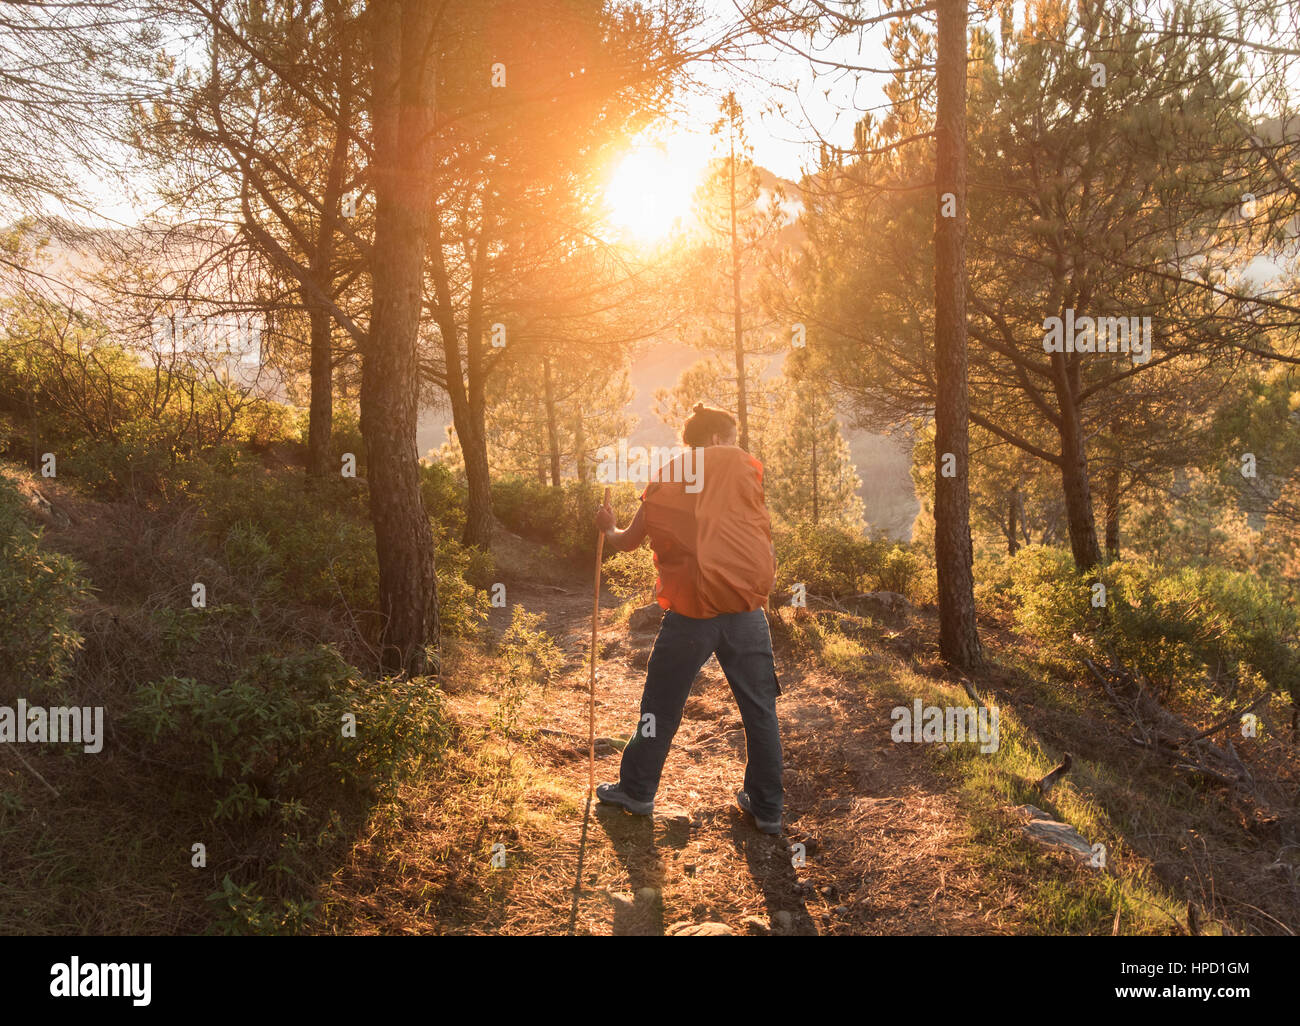 Forest bathing, Shinrin Youku. Female hiker in mountain pine forest at sunrise on Gran Canaria, Canary Islands, Spain Stock Photo